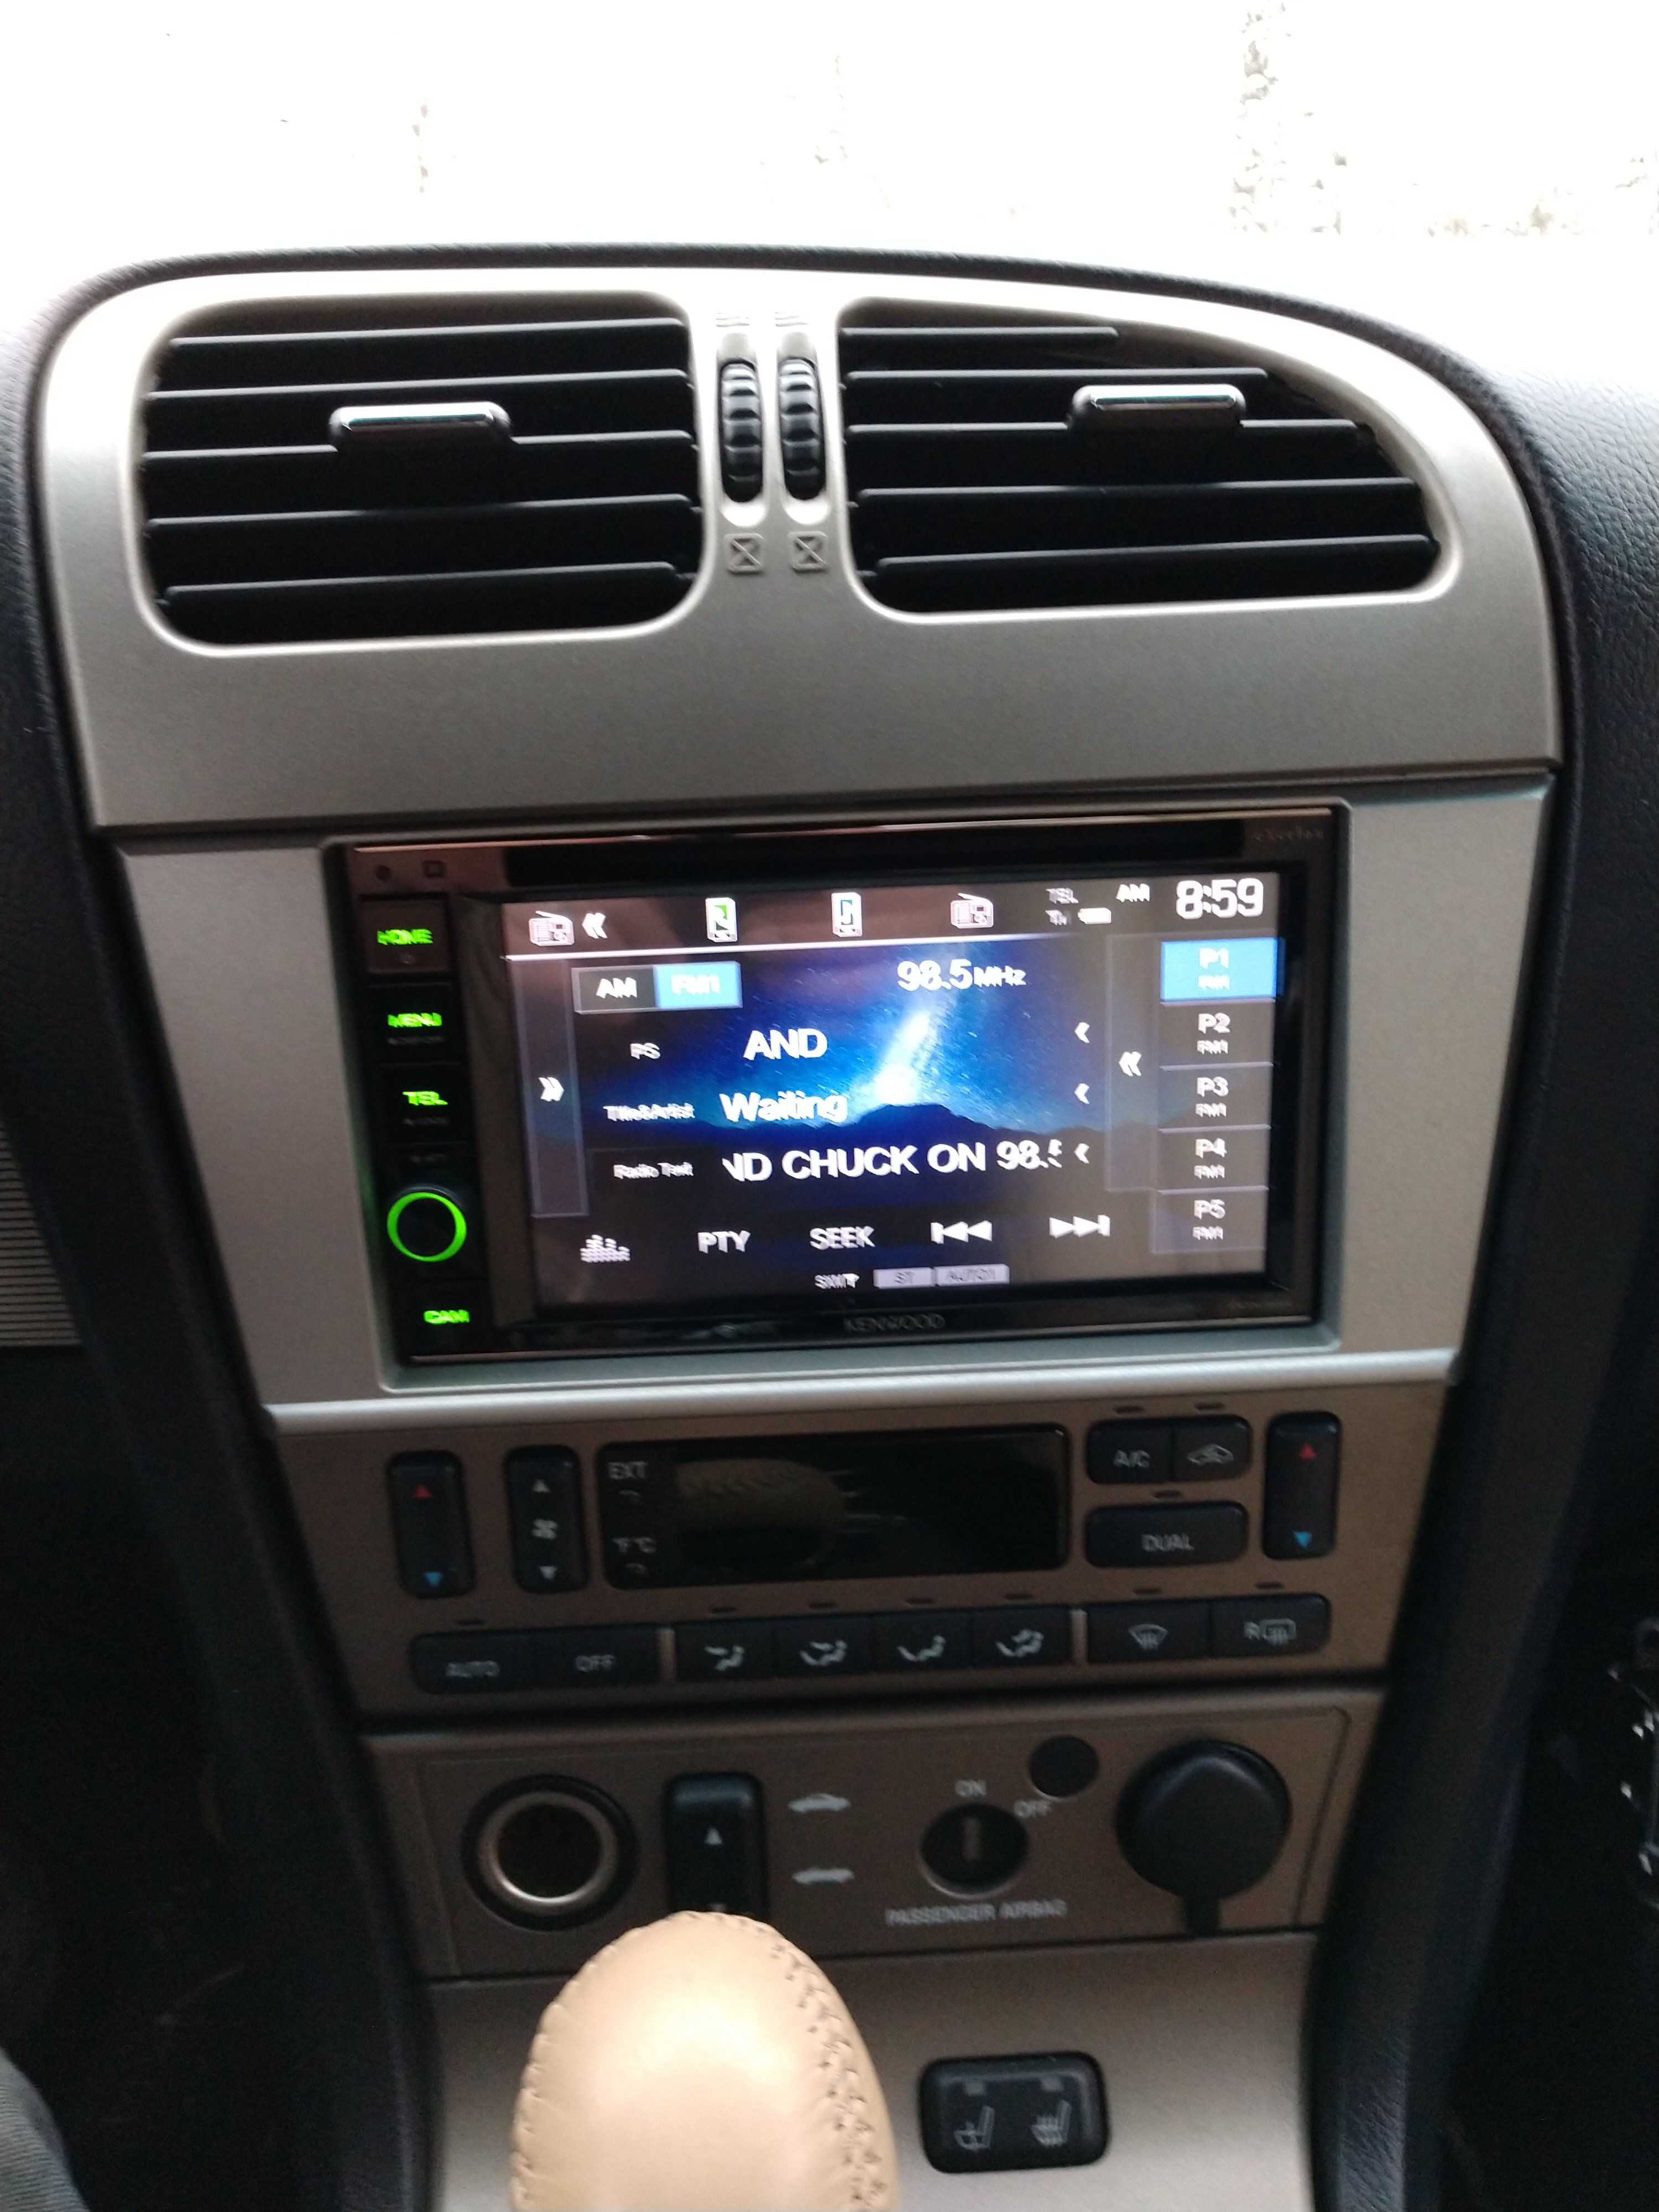 New stereo with backup camera